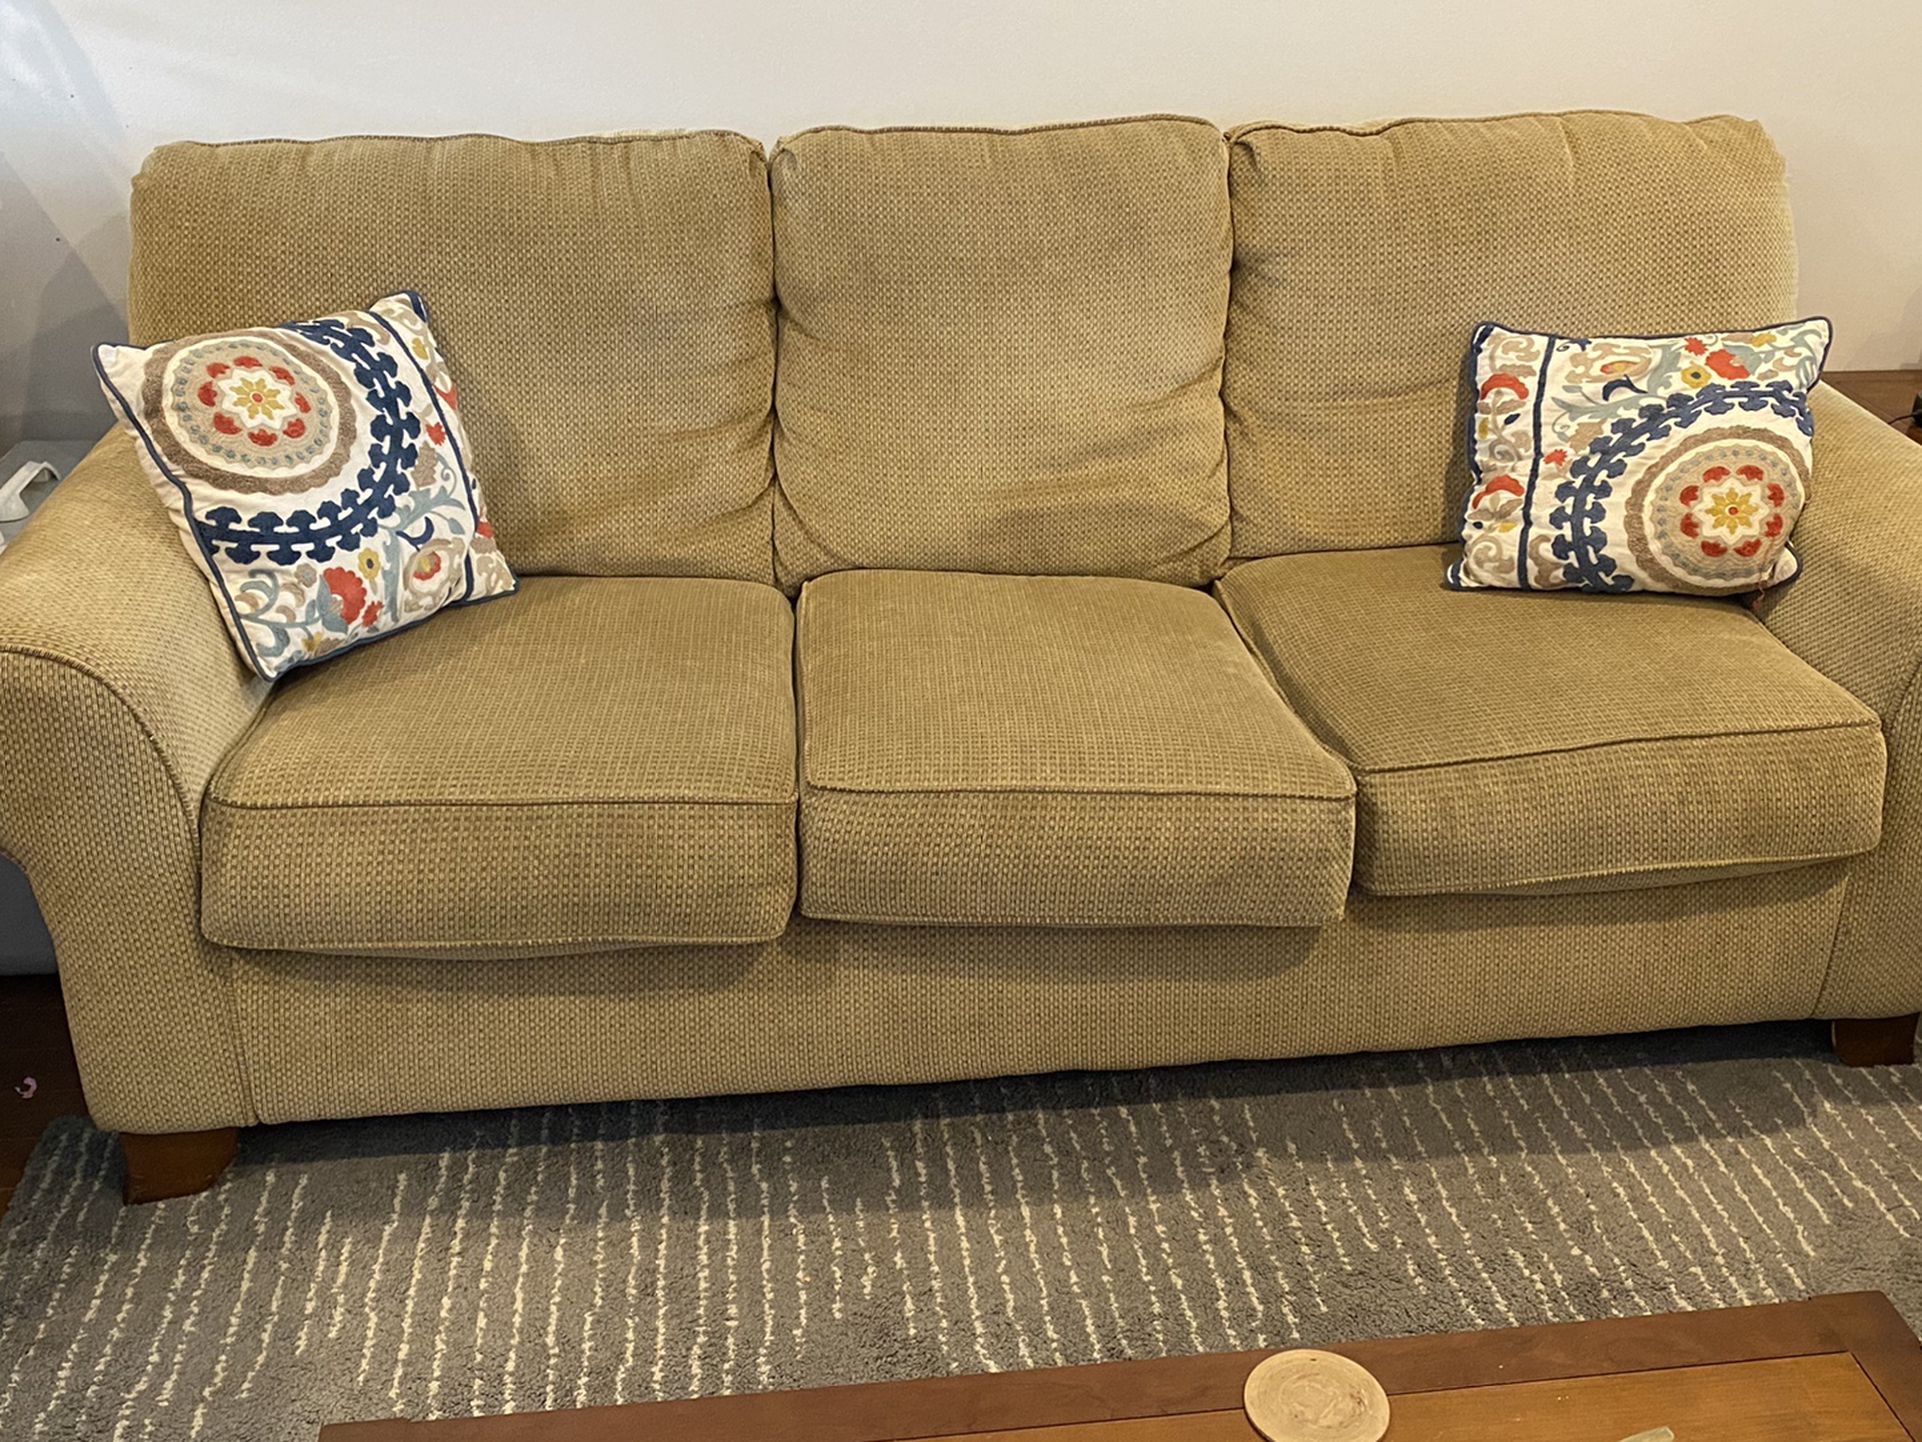 FREE Couch! Moving - Please Pick Up Today!